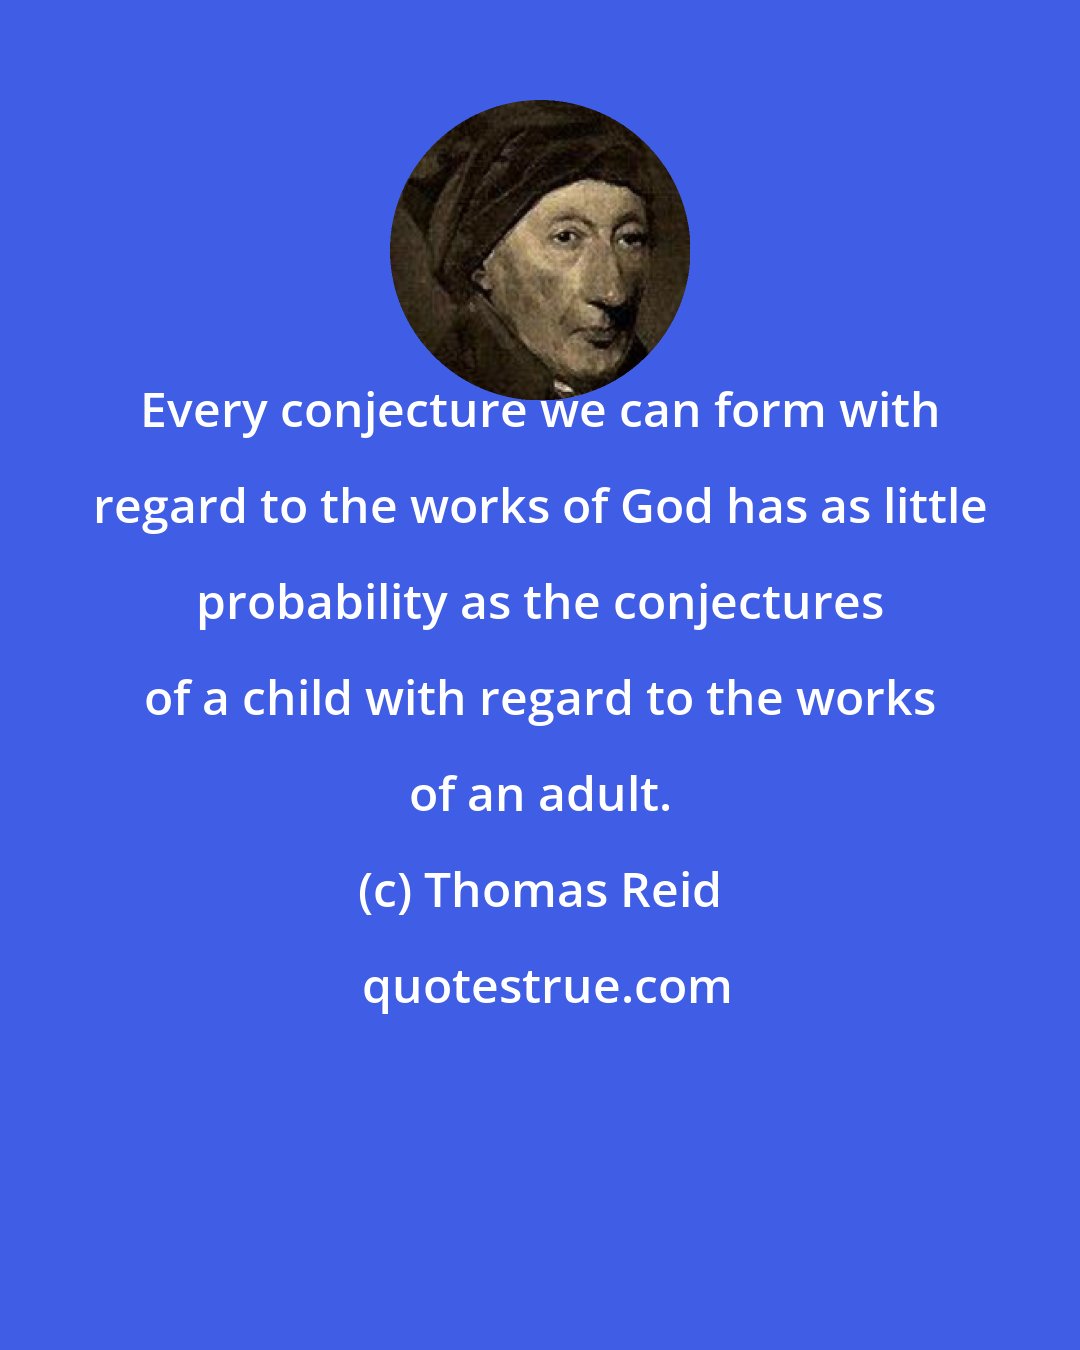 Thomas Reid: Every conjecture we can form with regard to the works of God has as little probability as the conjectures of a child with regard to the works of an adult.